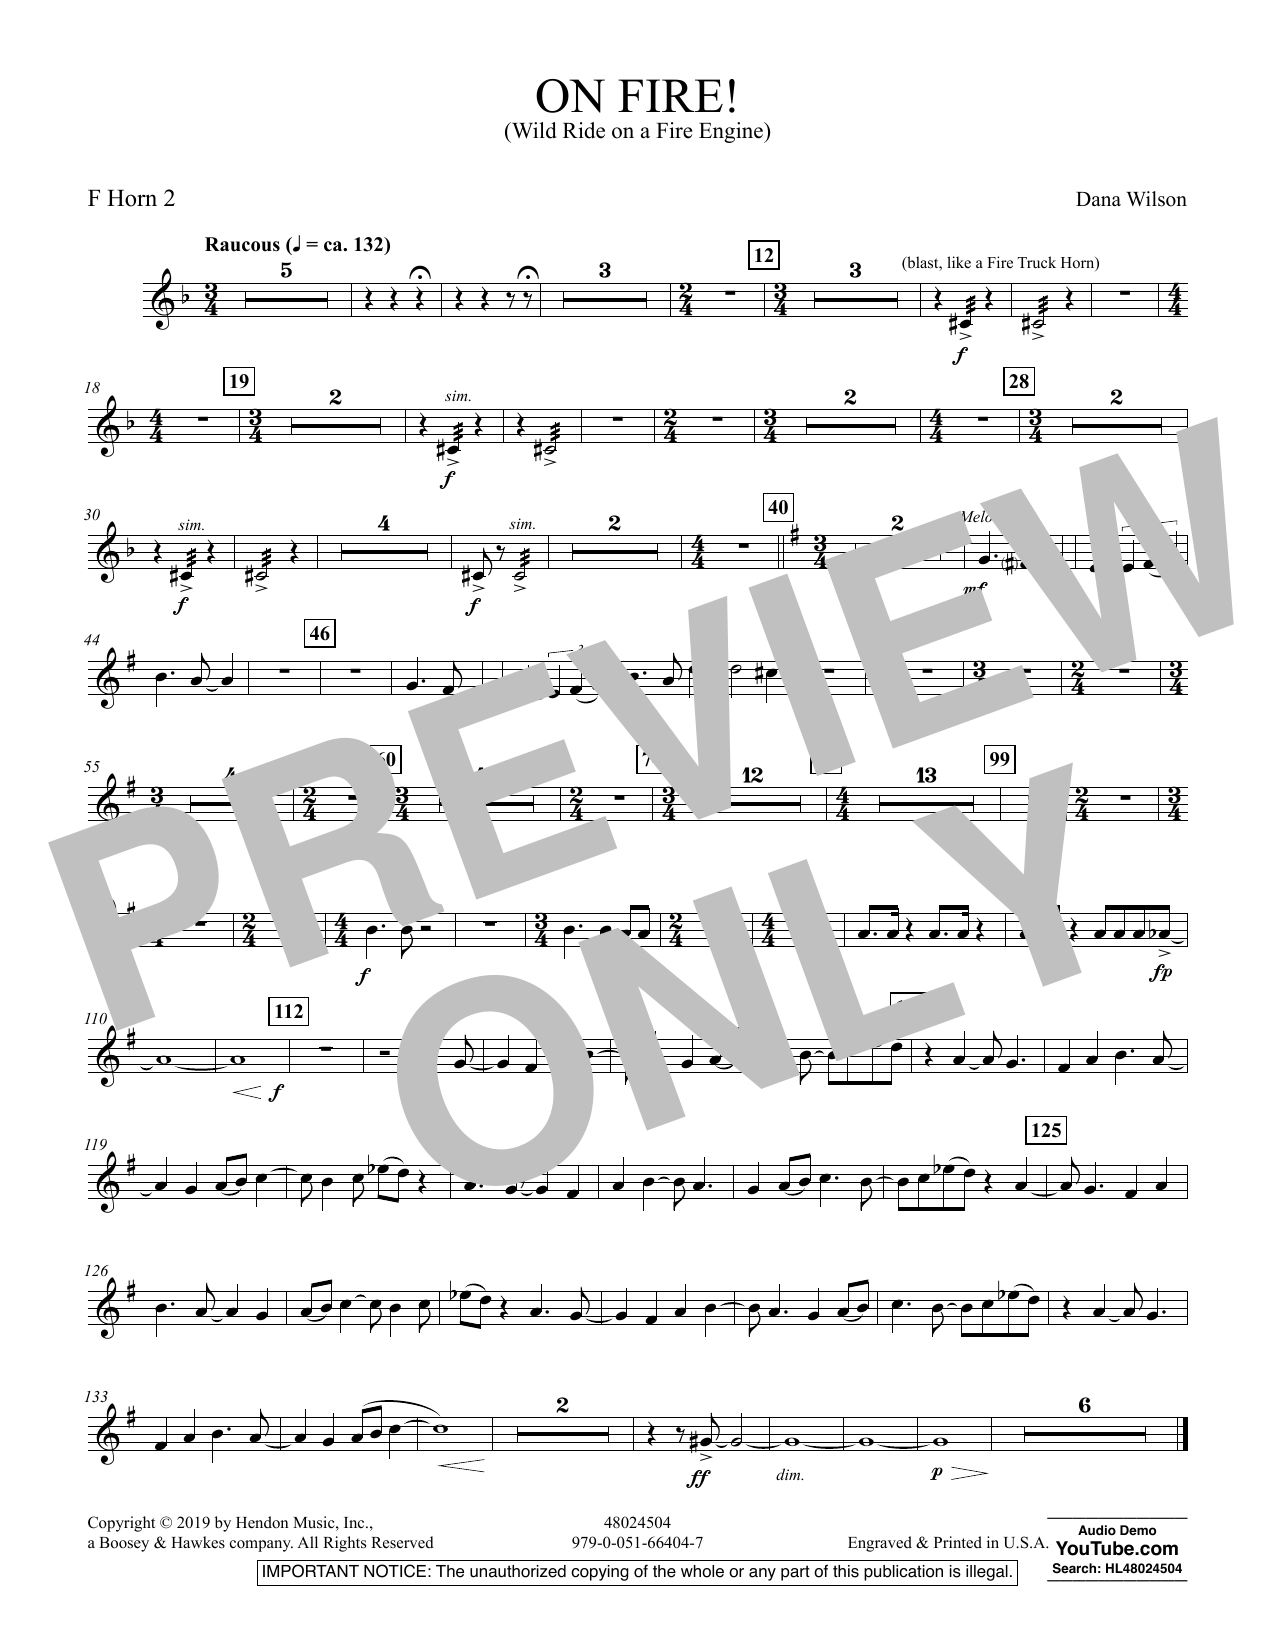 Dana Wilson On Fire! (Wild Ride on a Fire Engine) - F Horn 2 sheet music preview music notes and score for Concert Band including 1 page(s)